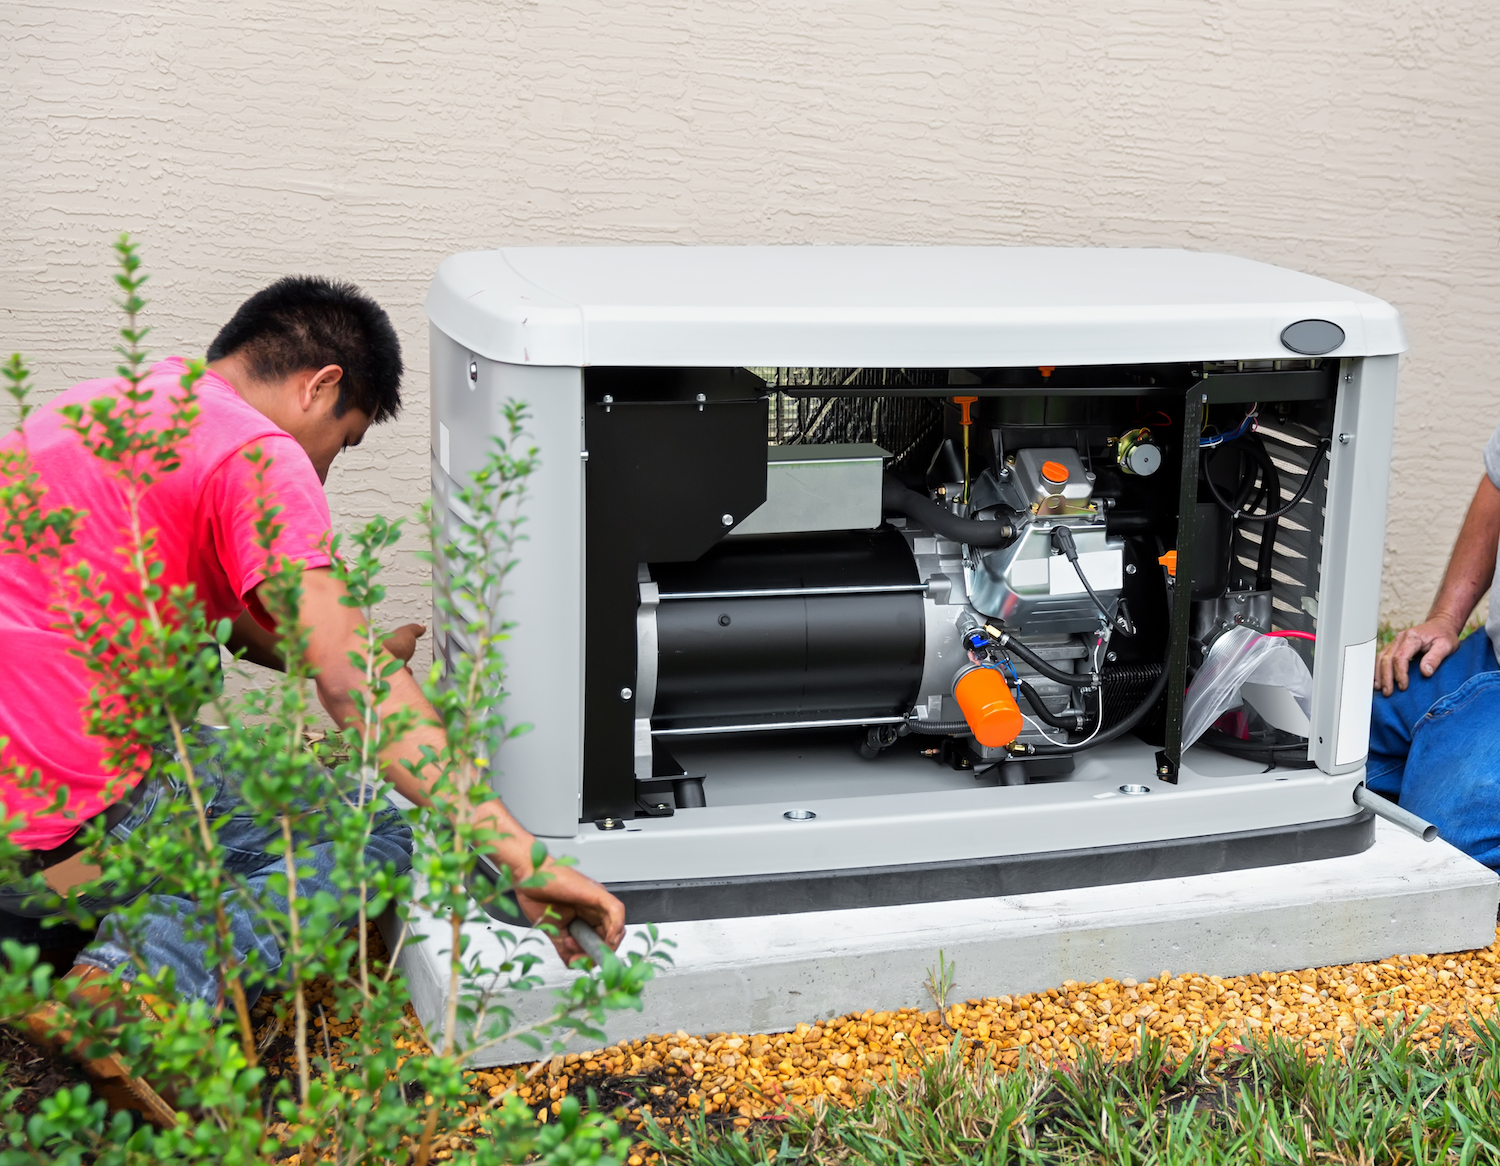 best-home-generator-2020-cheapest-offers-save-57-jlcatj-gob-mx